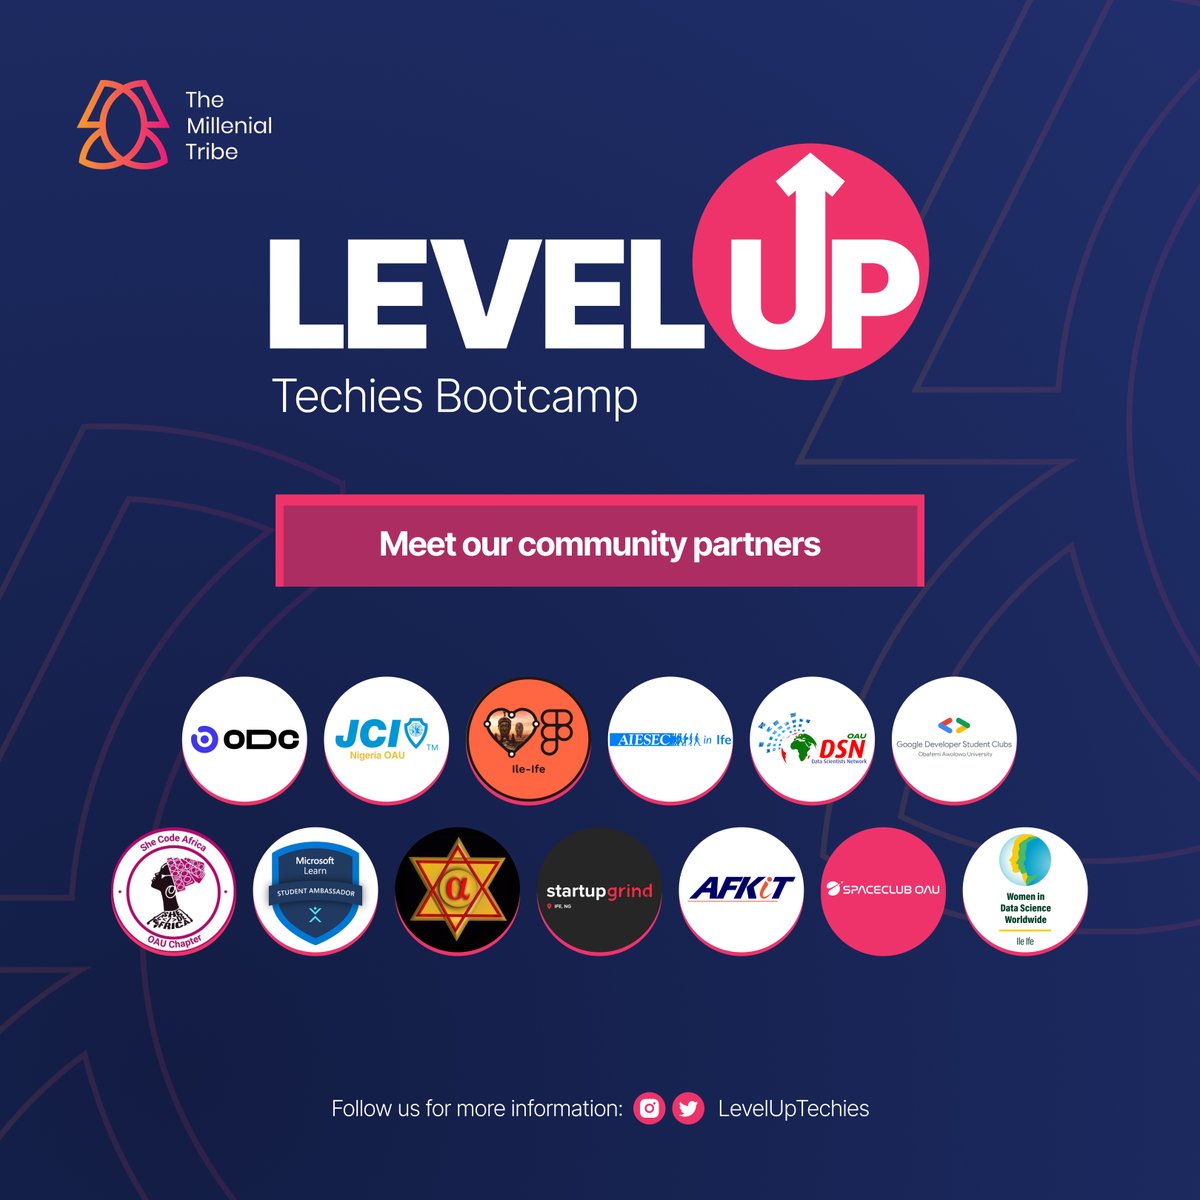 I am thrilled to announce the community partners for our LevelUp Techies Bootcamp!   

Together, we're empowering the next generation of tech talents from OAU.  

Stay tuned for more info on how you can be a part of the bootcamp.  

#OAU #xoau #oautwitter #leveluptechies